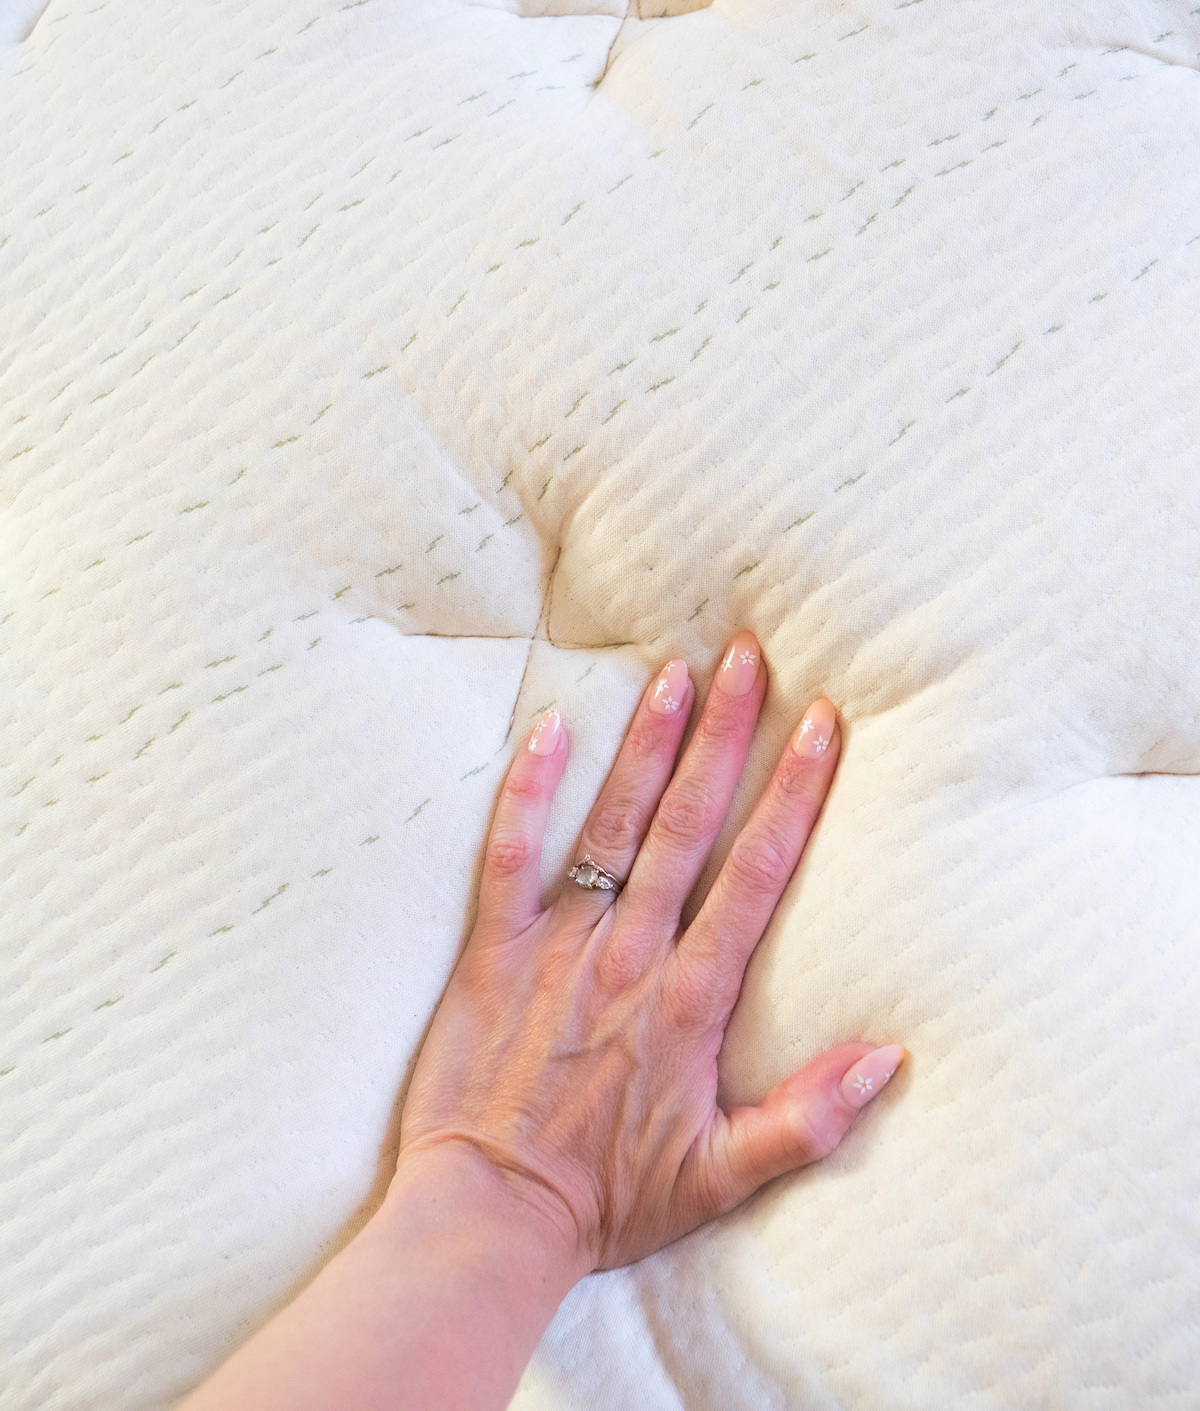 A hand pressing down on a soft, quilted organic mattress, showcasing its texture and cushioning.